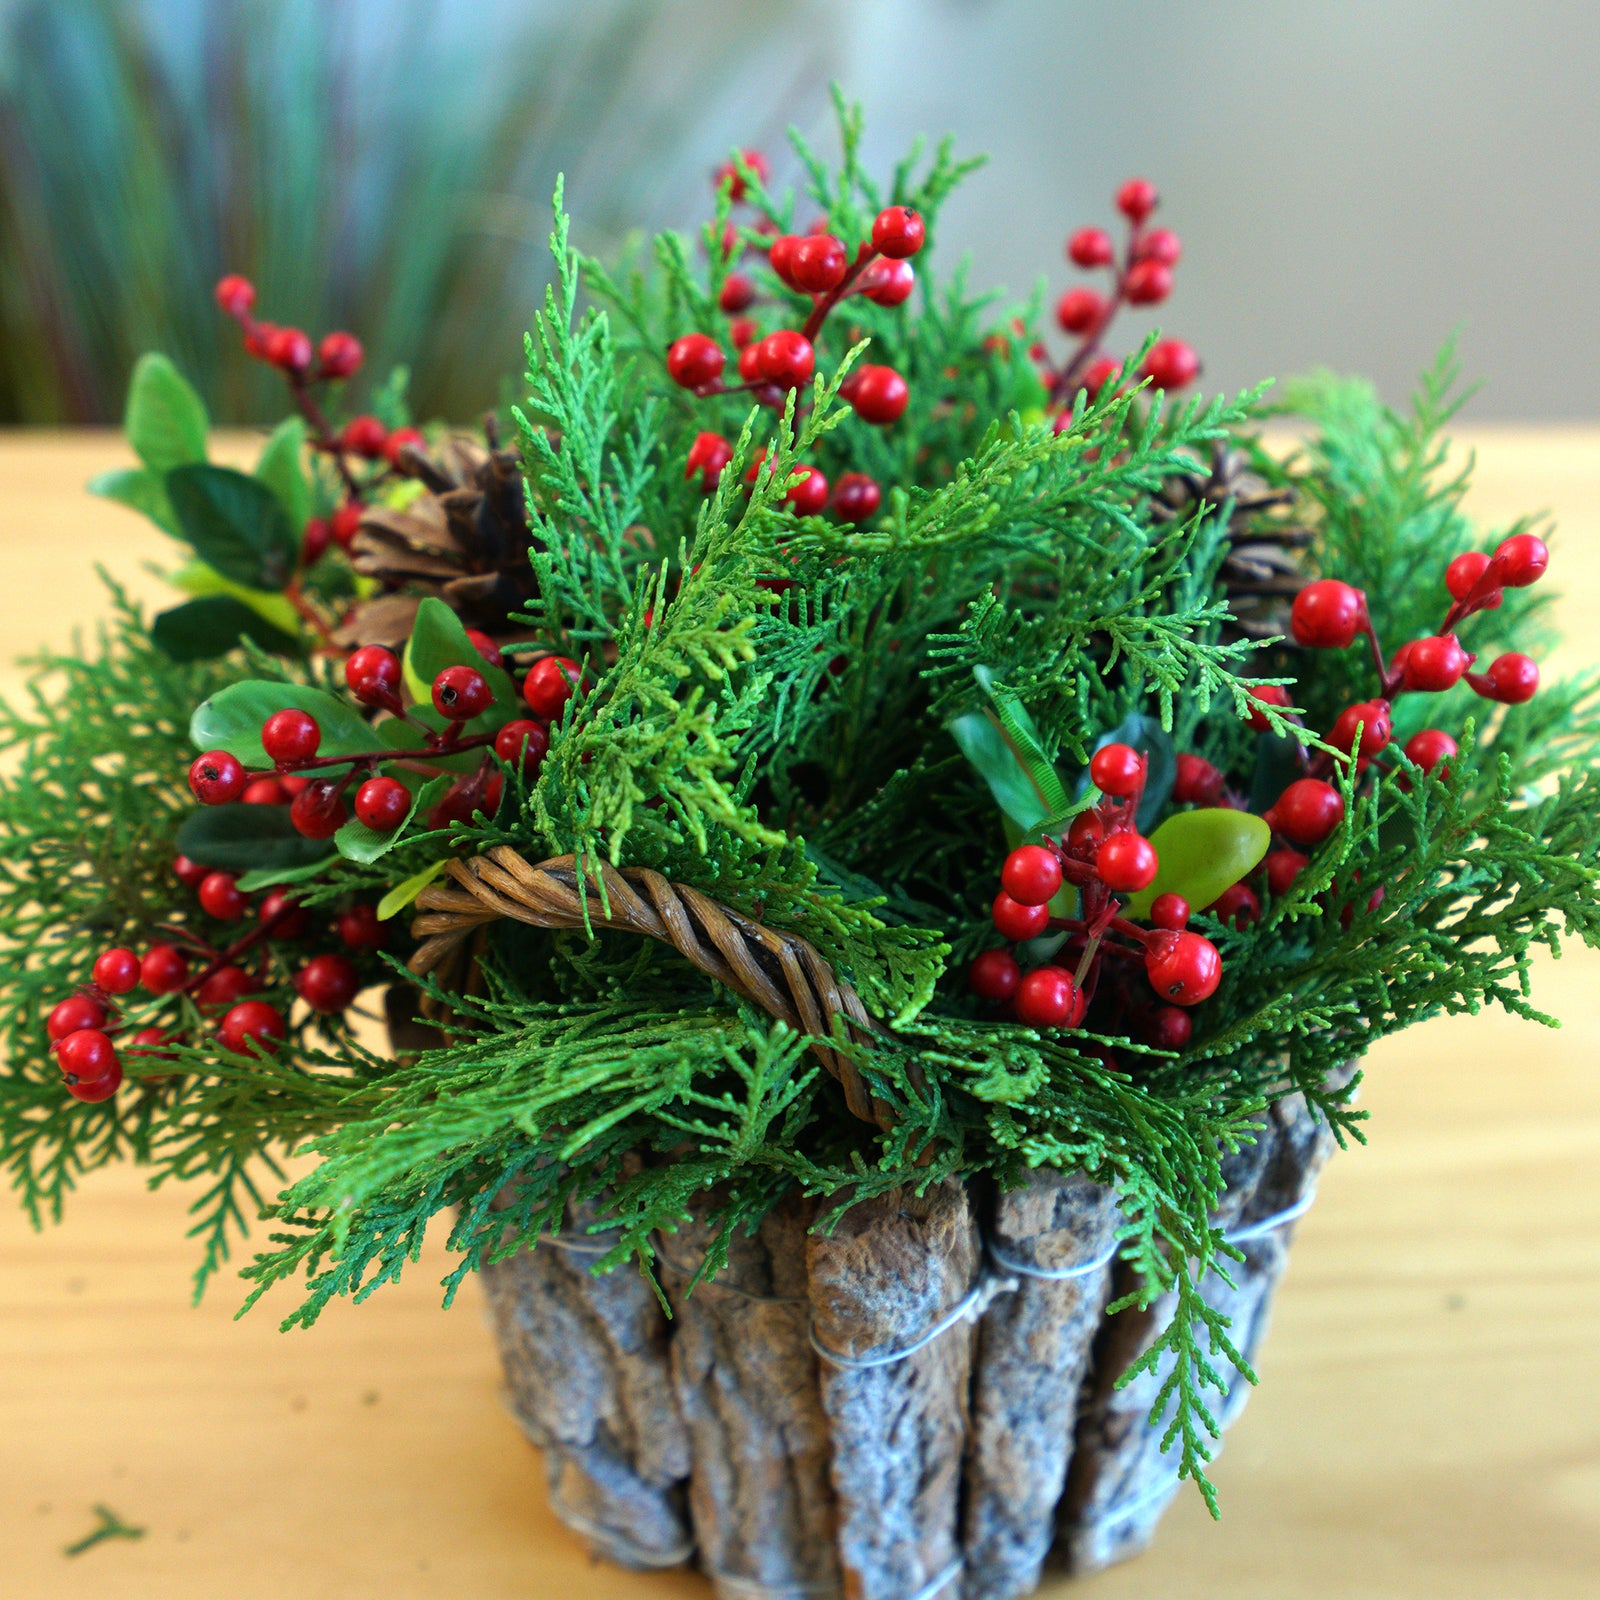 OLYPHAN Red Berry Stems Pine Branches Evergreen Berries DÃ©cor 8 PCS  Discou- Artificial Pine